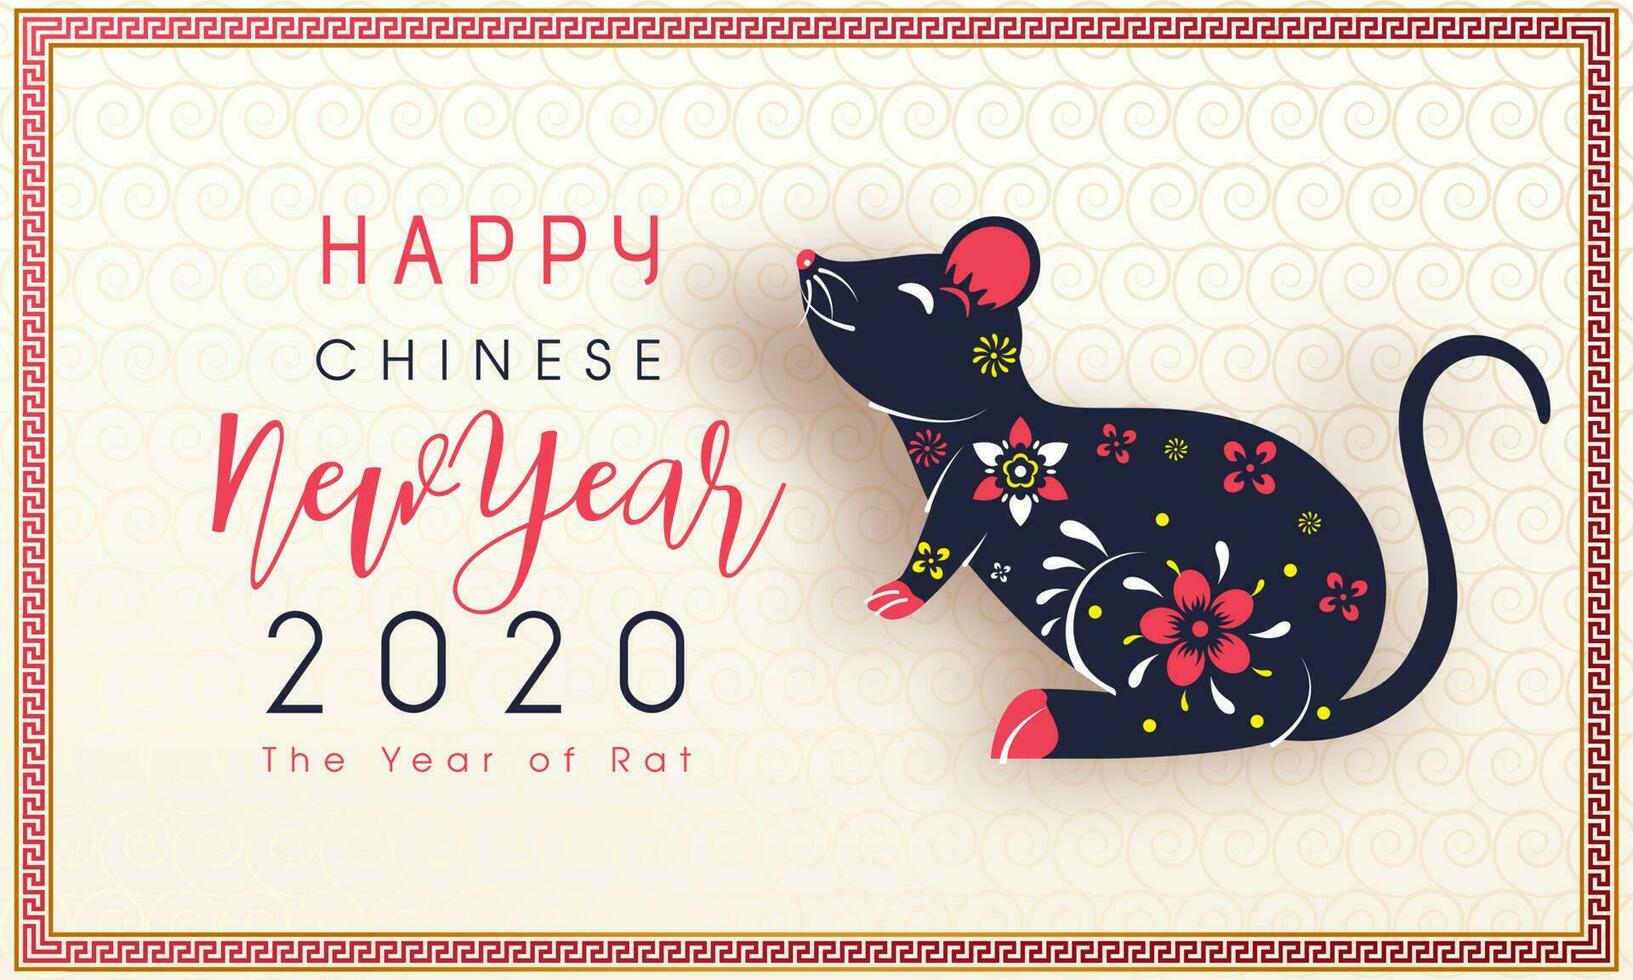 Happy Chinese New Year celebration greeting card design with rat zodiac sign on seamless swirl pattern background for 2020 The Year of Rat. vector